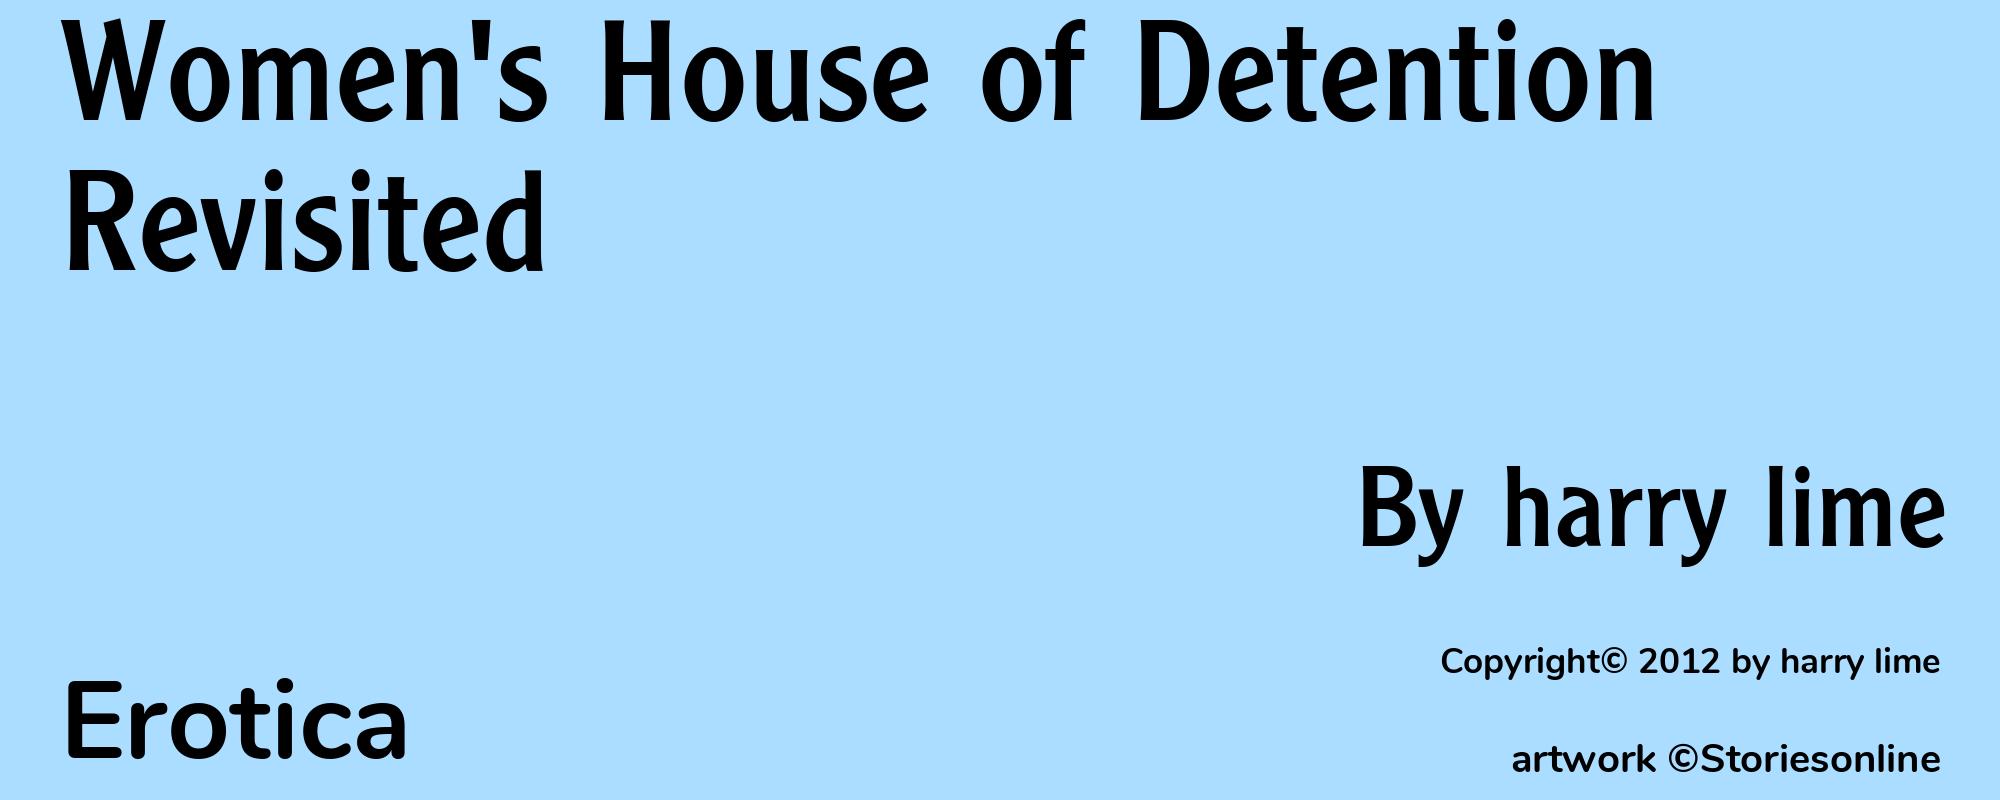 Women's House of Detention Revisited - Cover